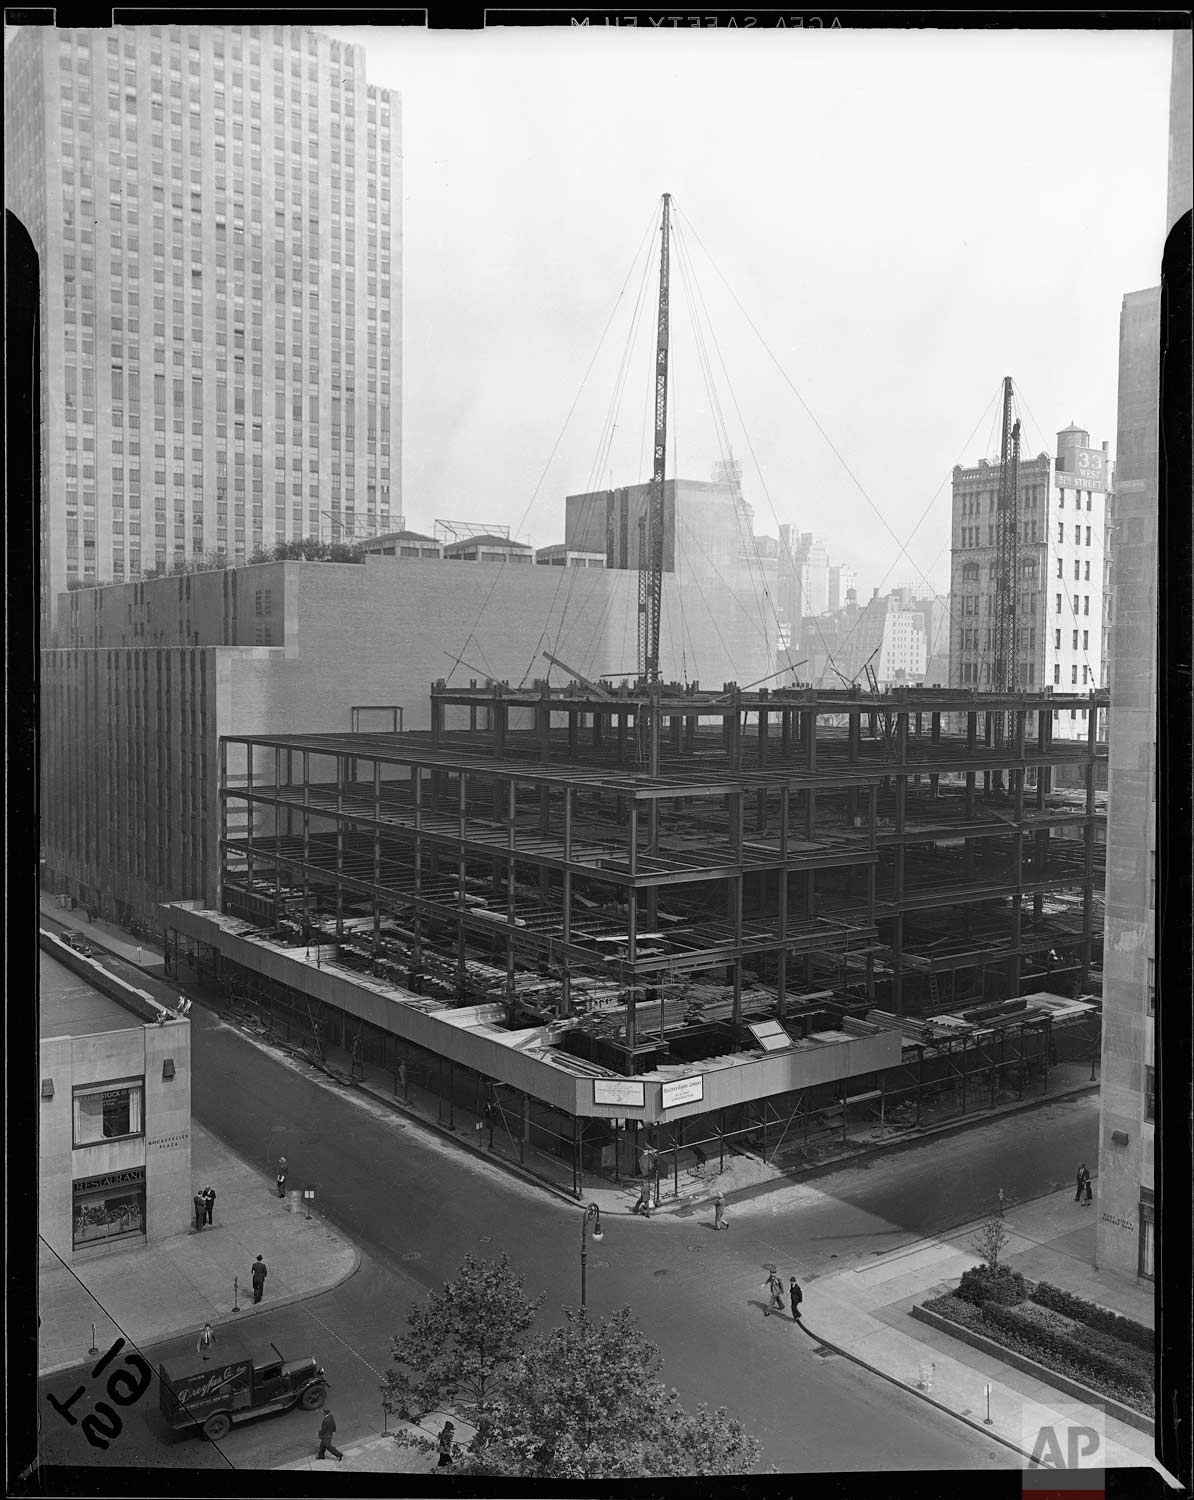  The new Associated Press building is shown under construction at Rockefeller Center, New York, May 17, 1938. (AP Photo/Corporate Archives) 